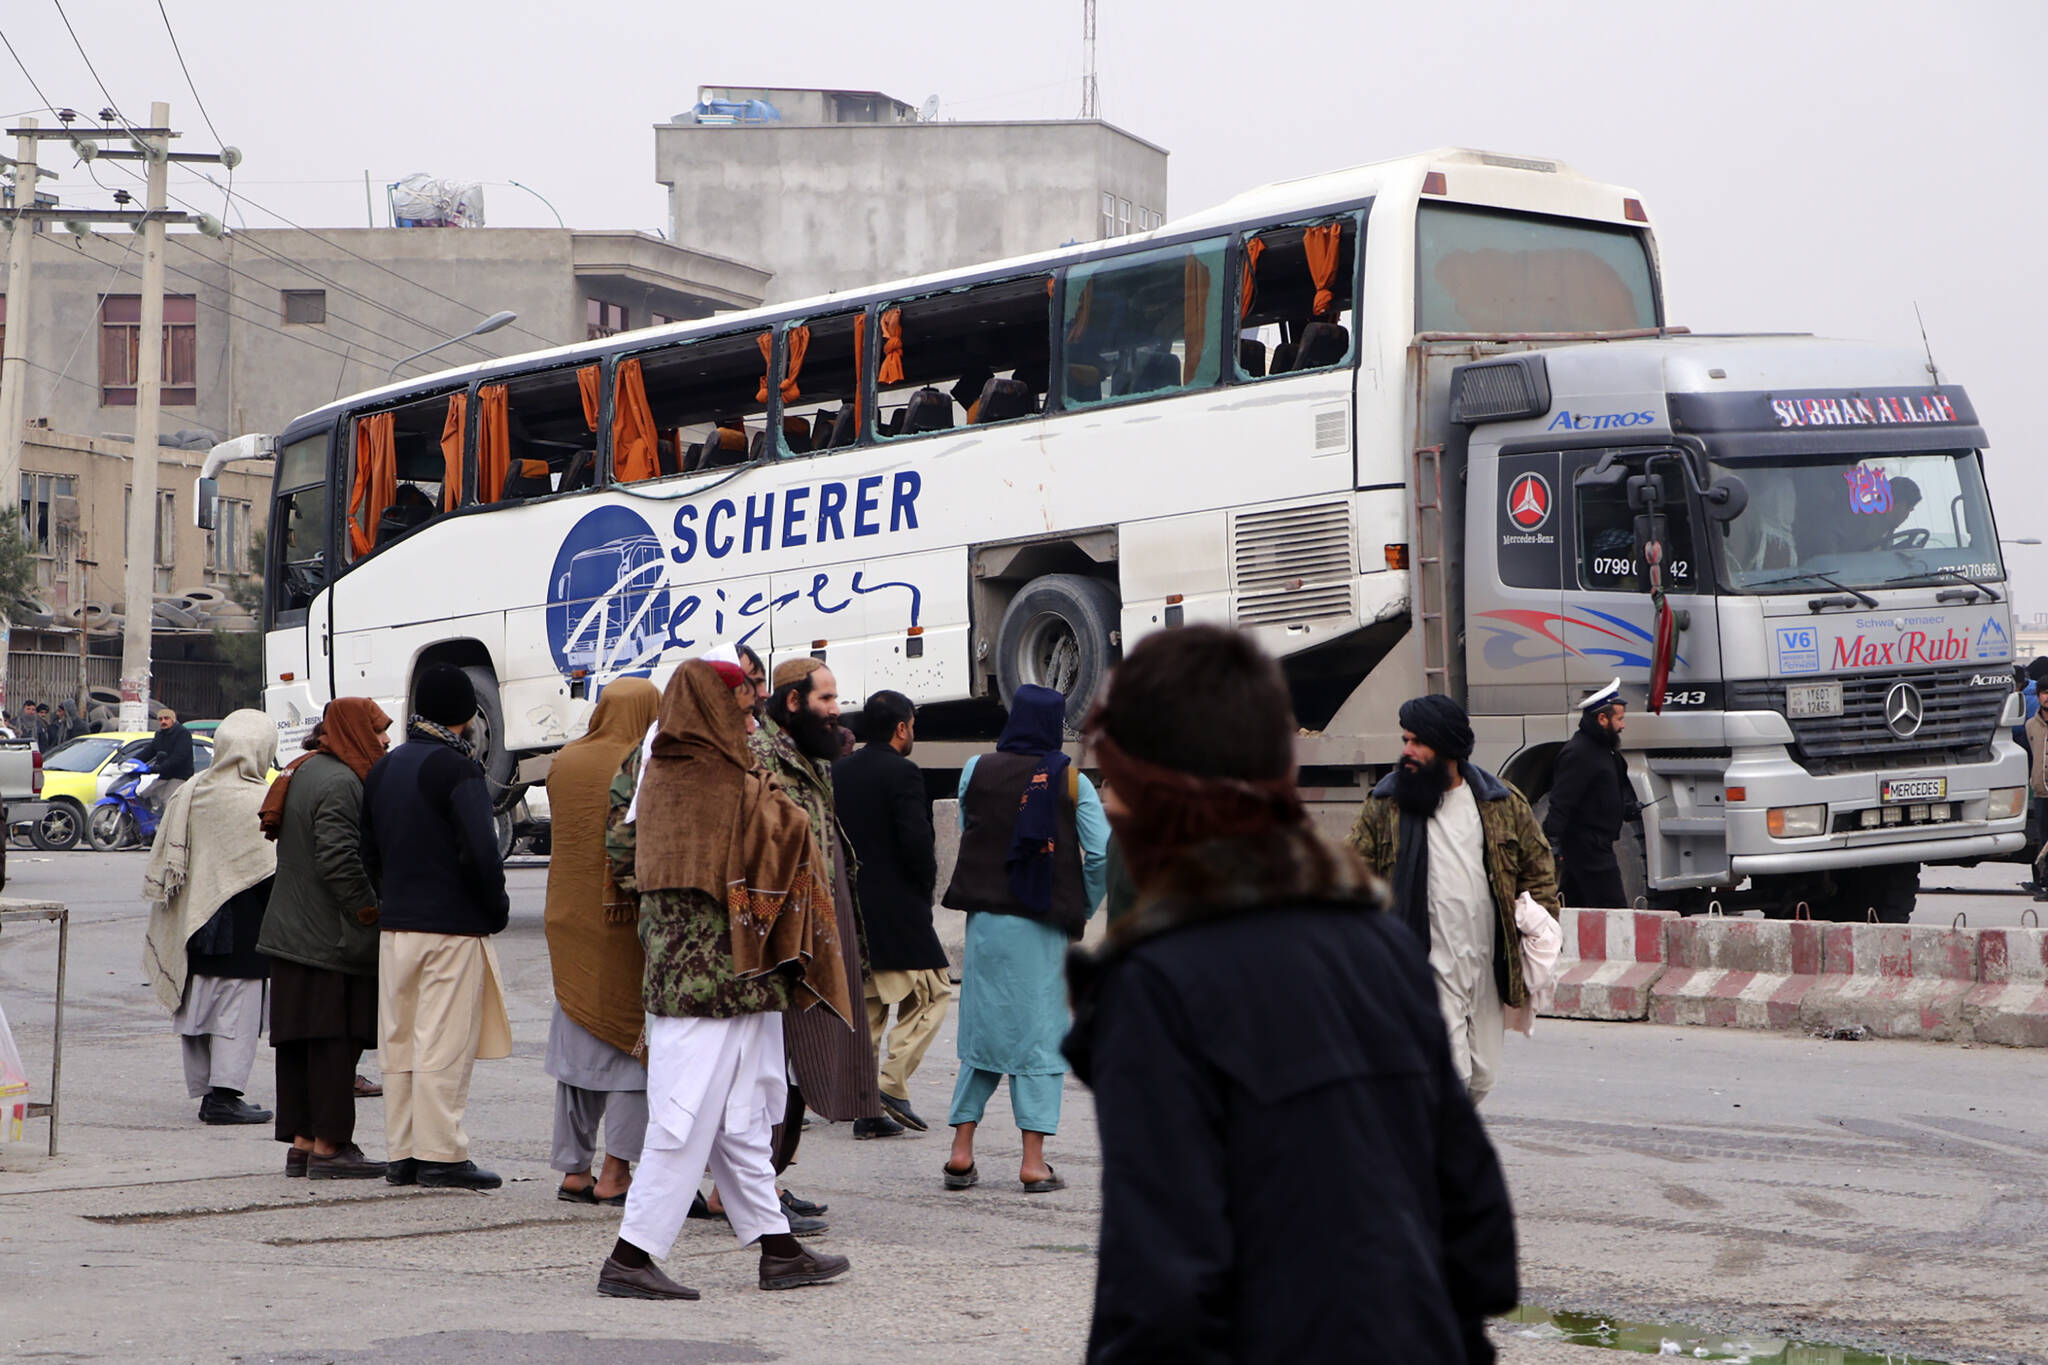 Taliban security personnel carry a damaged bus after a roadside bomb blast in Mazar-e Sharif, the capital city of Balkh province, in northern Afghanistan, Tuesday, Dec. 6, 2022. A Taliban official says that a roadside bomb went off near a government bus in northern Afghanistan, killing several people. (AP Photo)